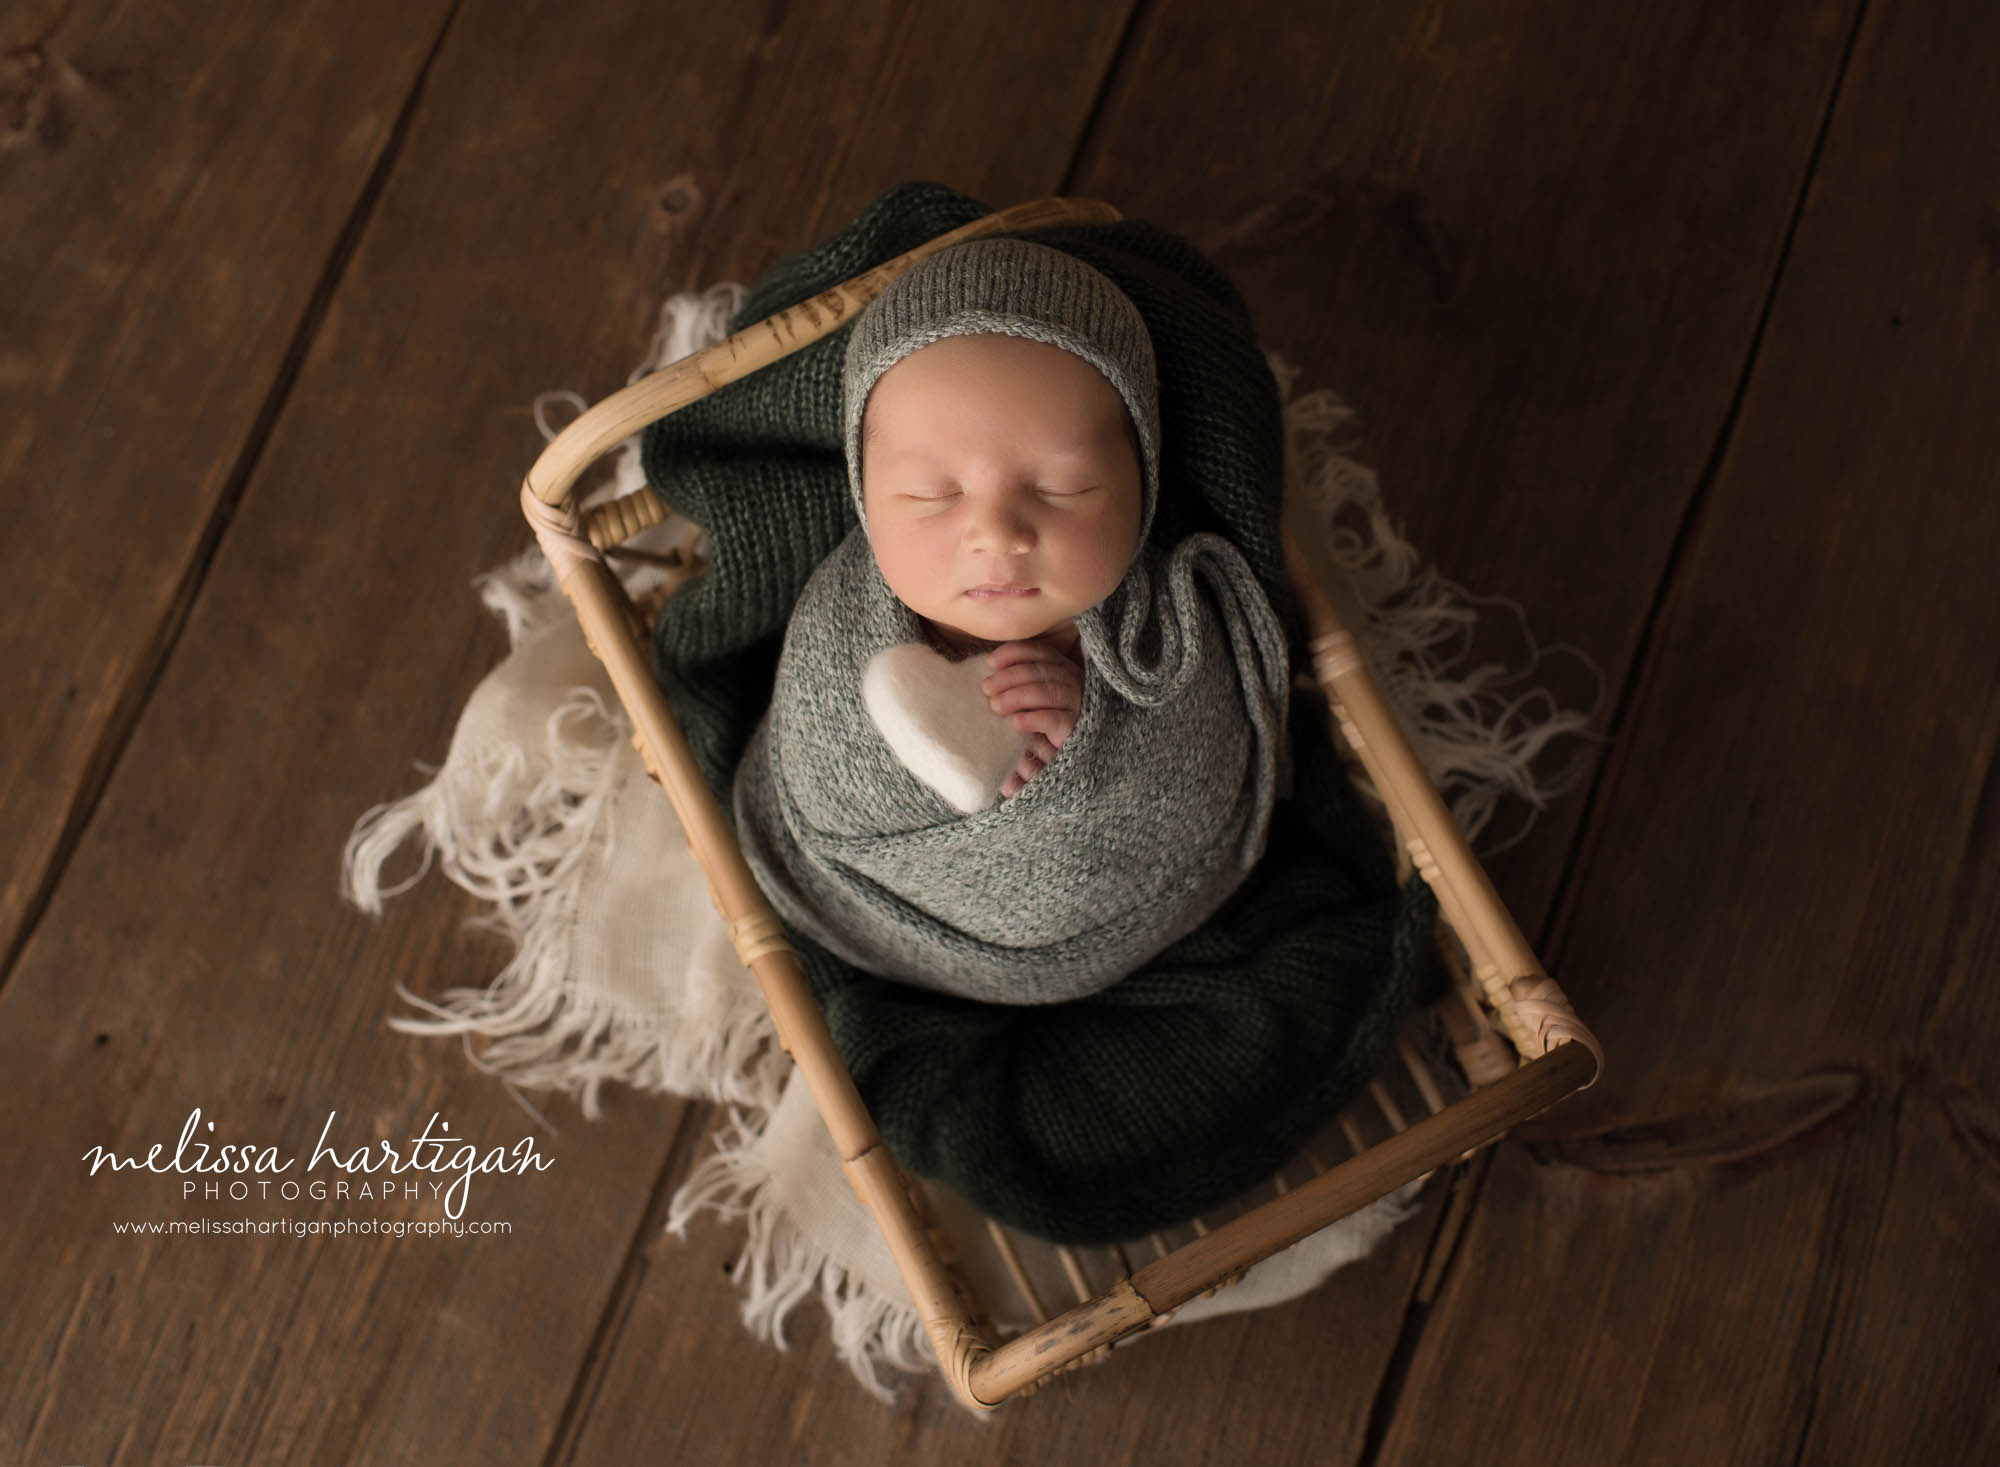 newborn baby boy posed in basket wearing knitted bonnet and wrapped in matching colored wrap holding felted heart prop